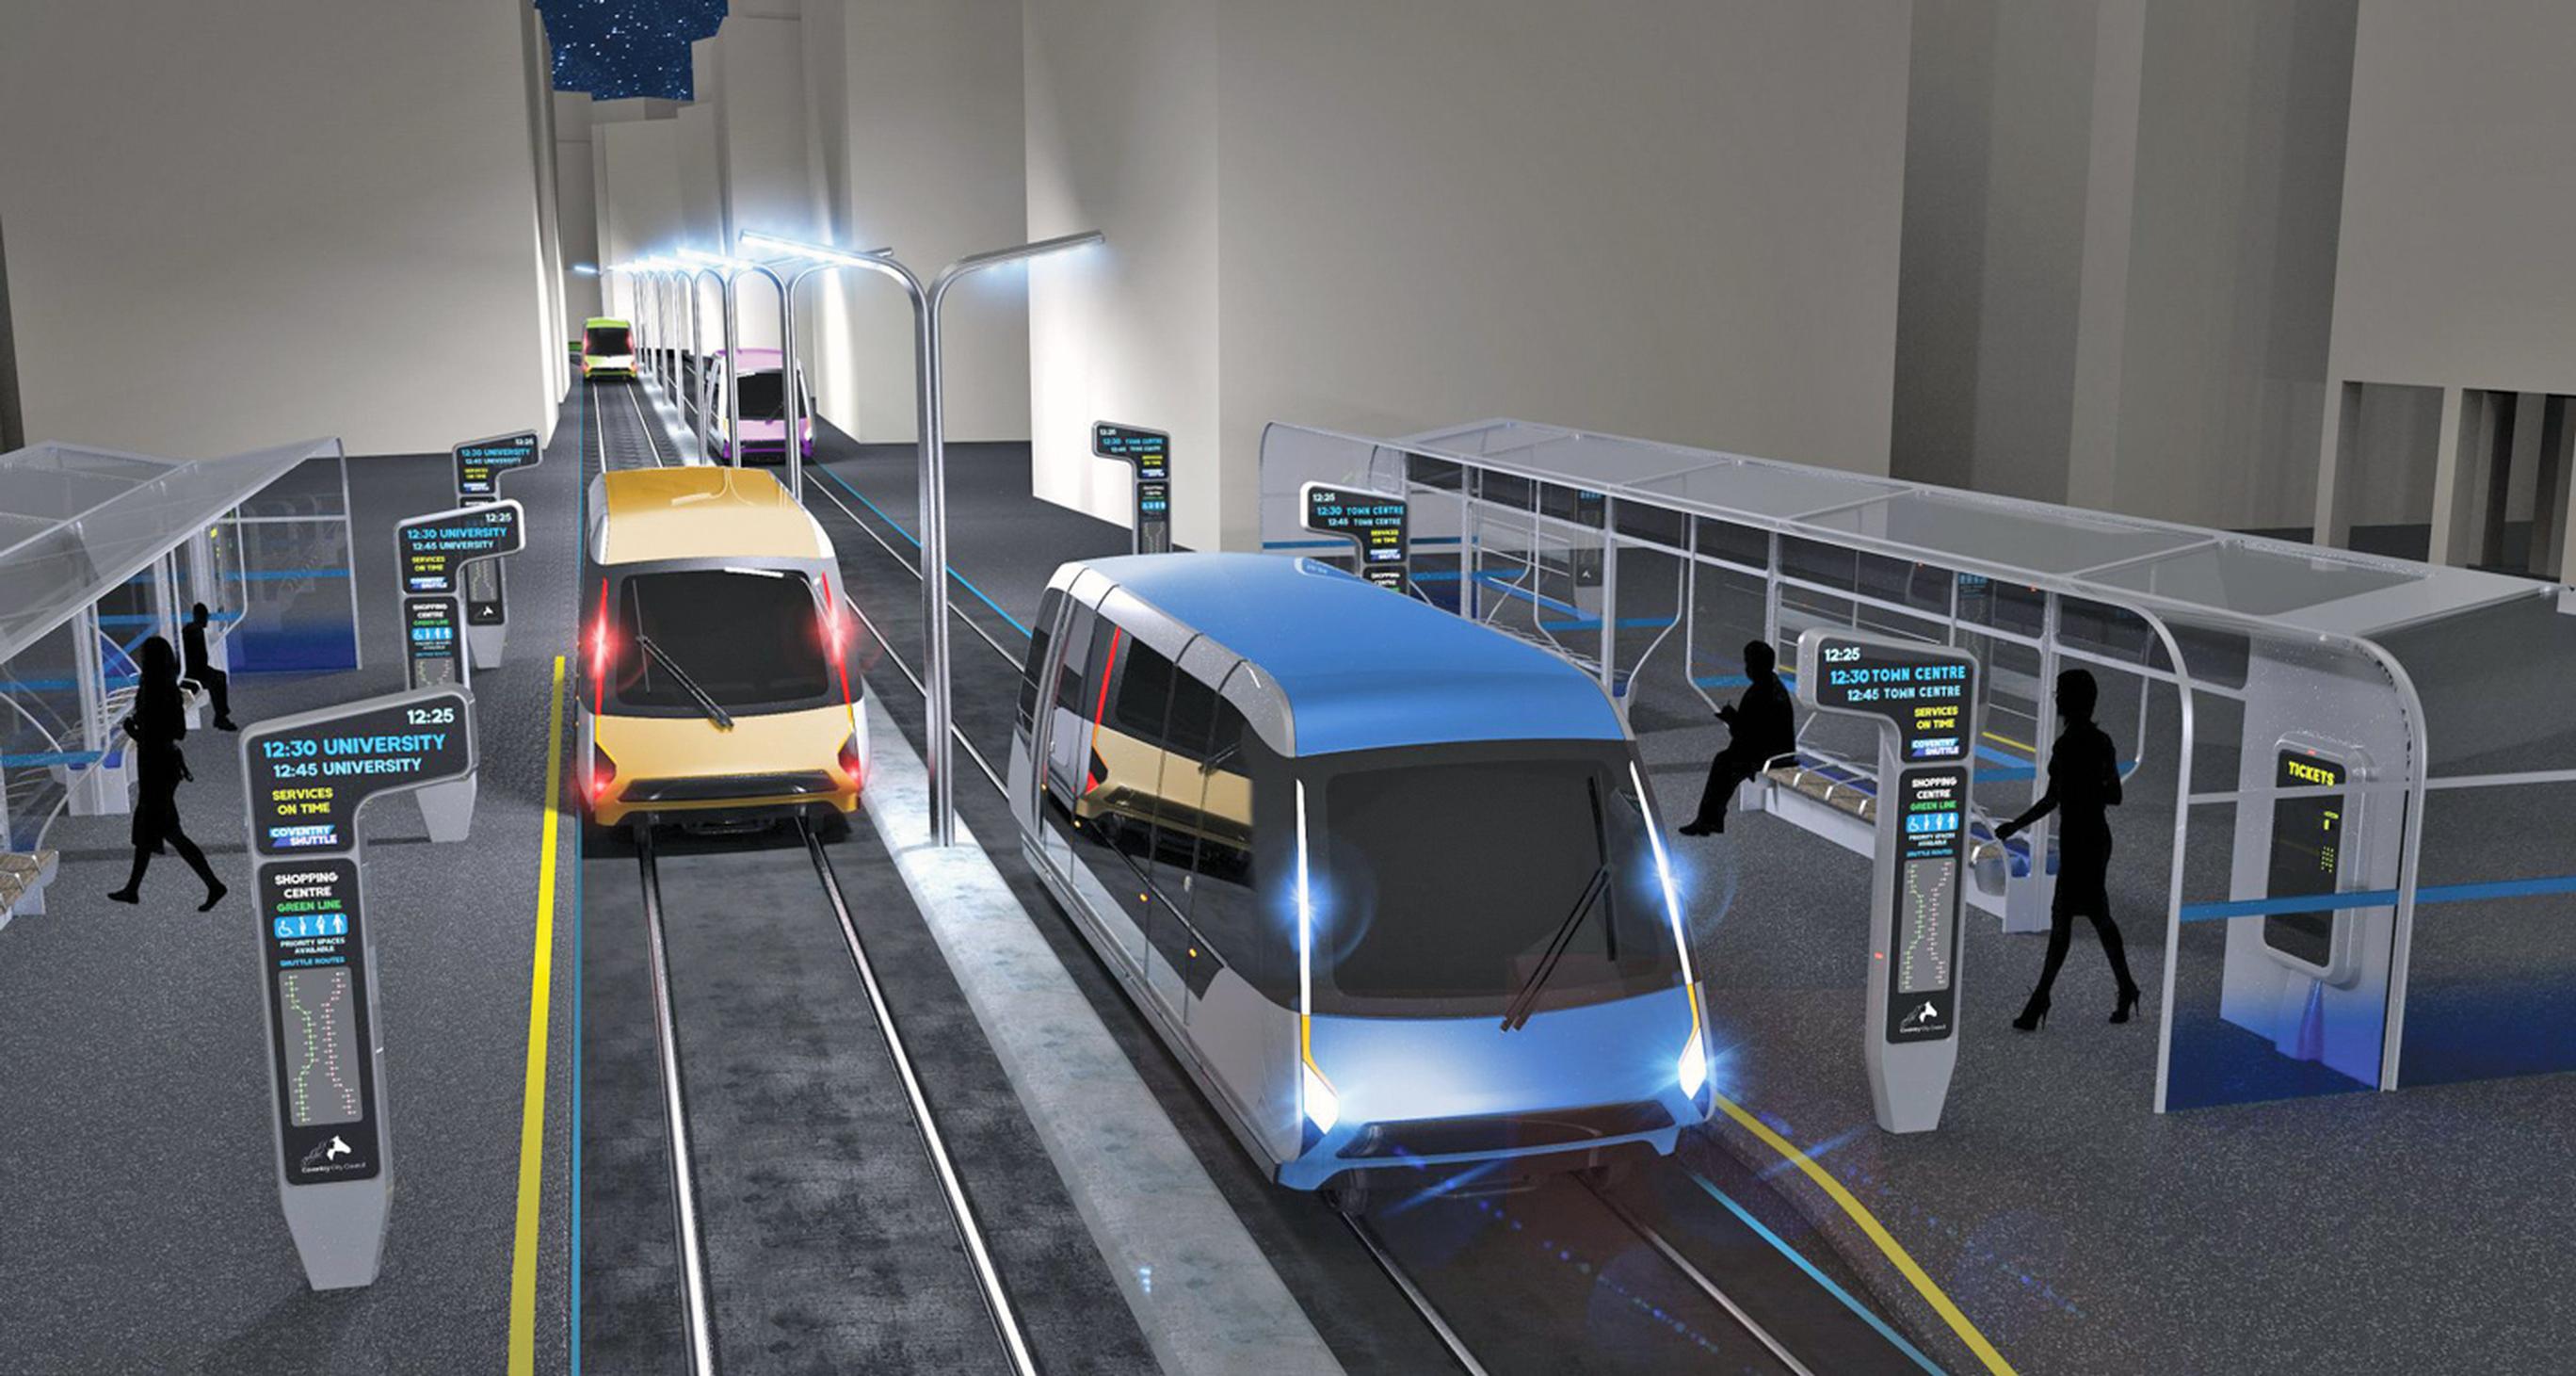 It’s hoped the Very Light Rail Centre will help make the West Midlands a world leader in the technology